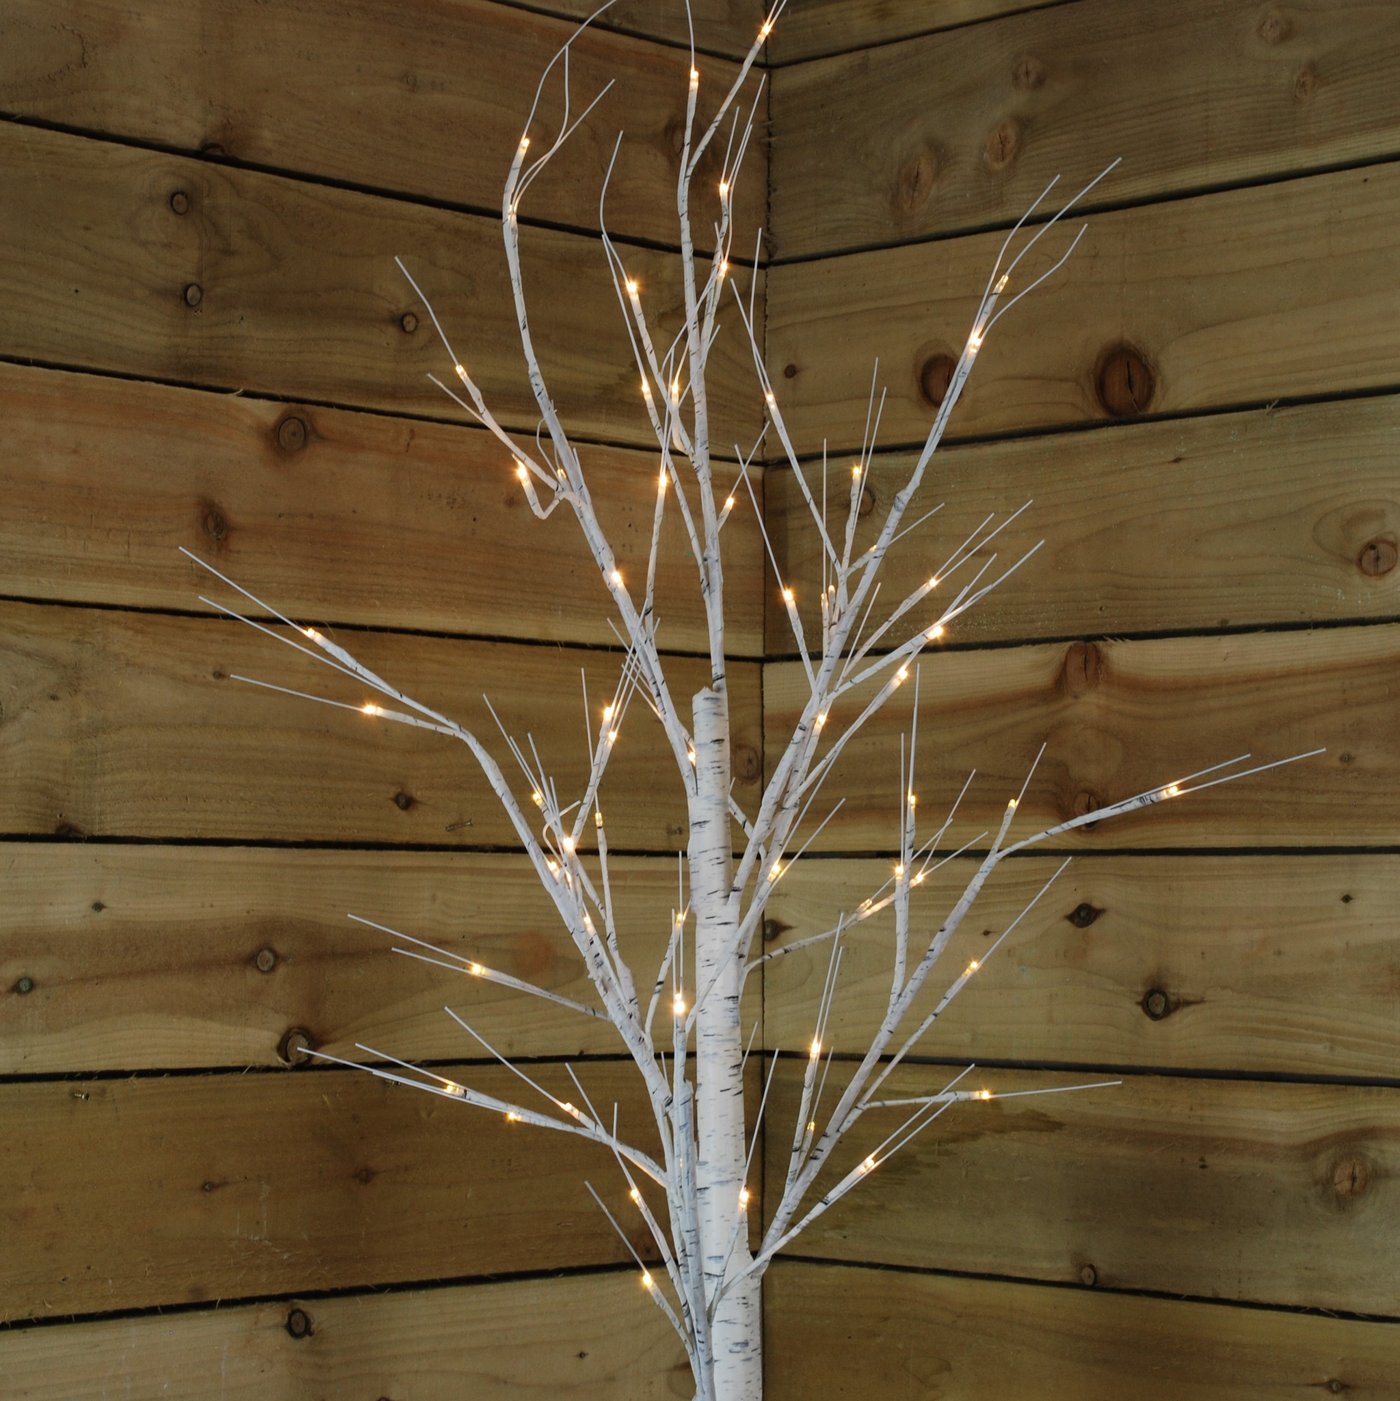 2.4m (8ft) Indoor Outdoor Christmas Lit Birch Tree with 136 Warm White LEDs